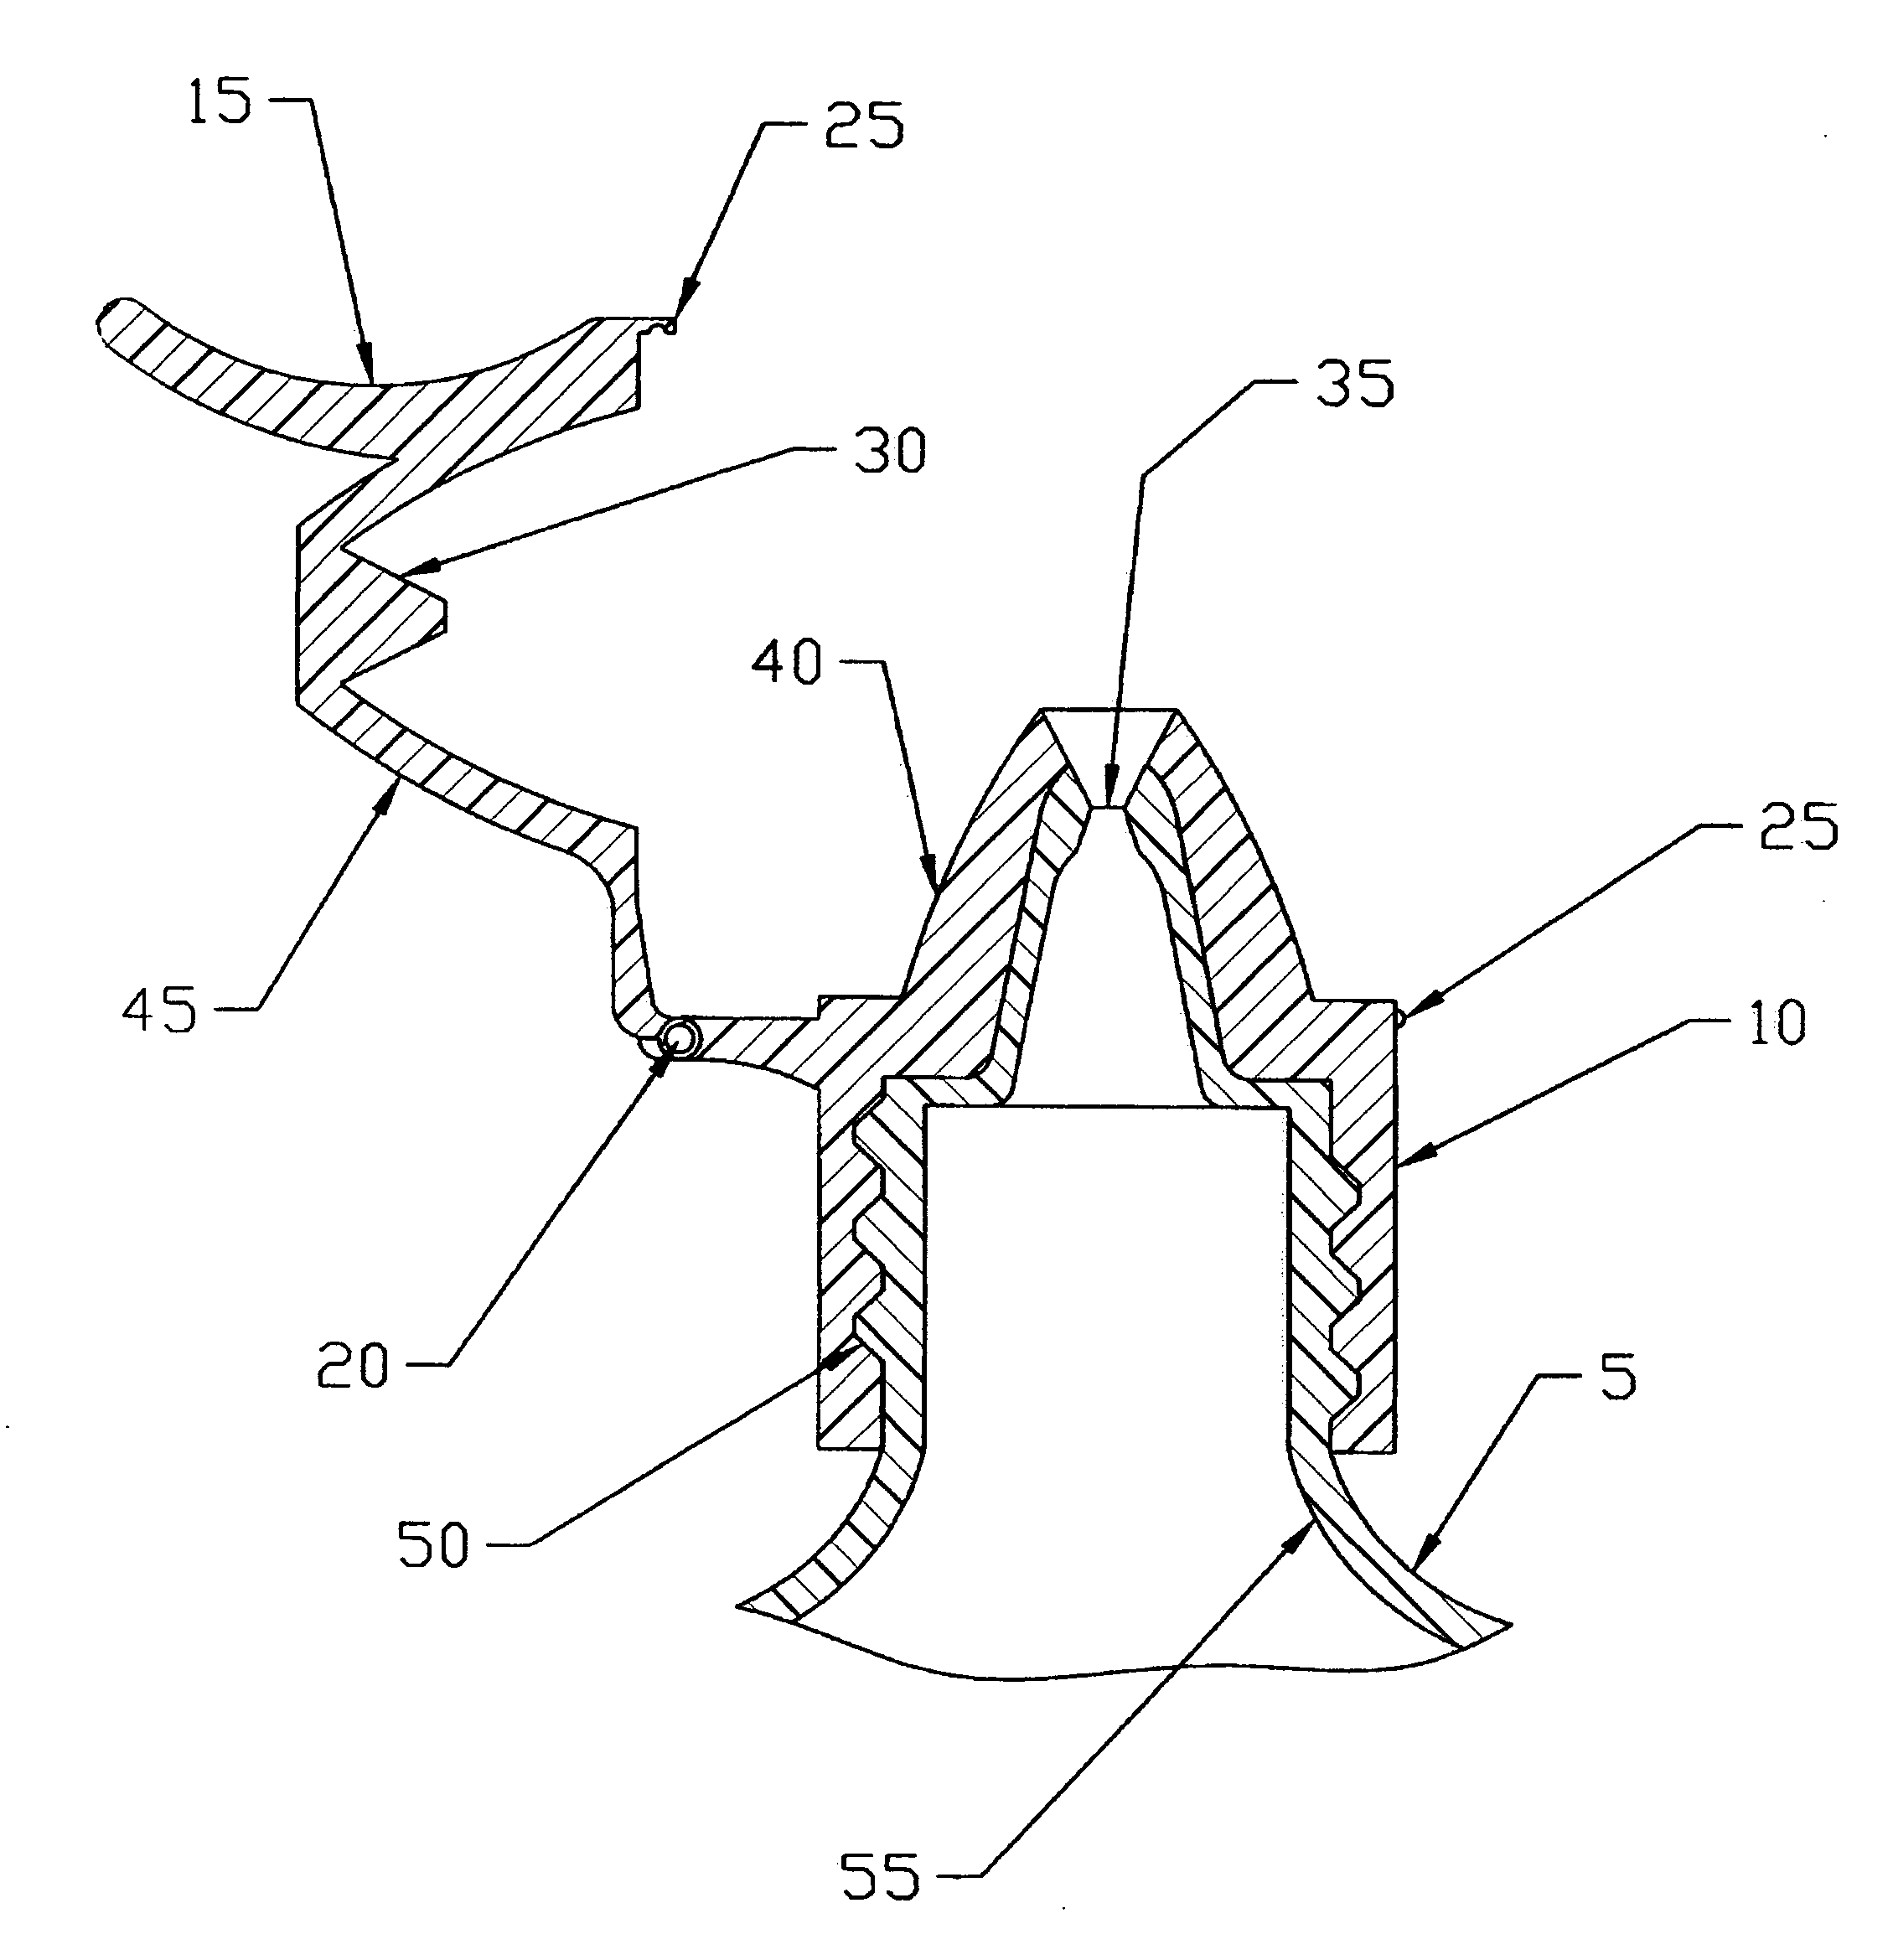 Ocular positioning droplet dispencing device with a recessed dispensing oriface